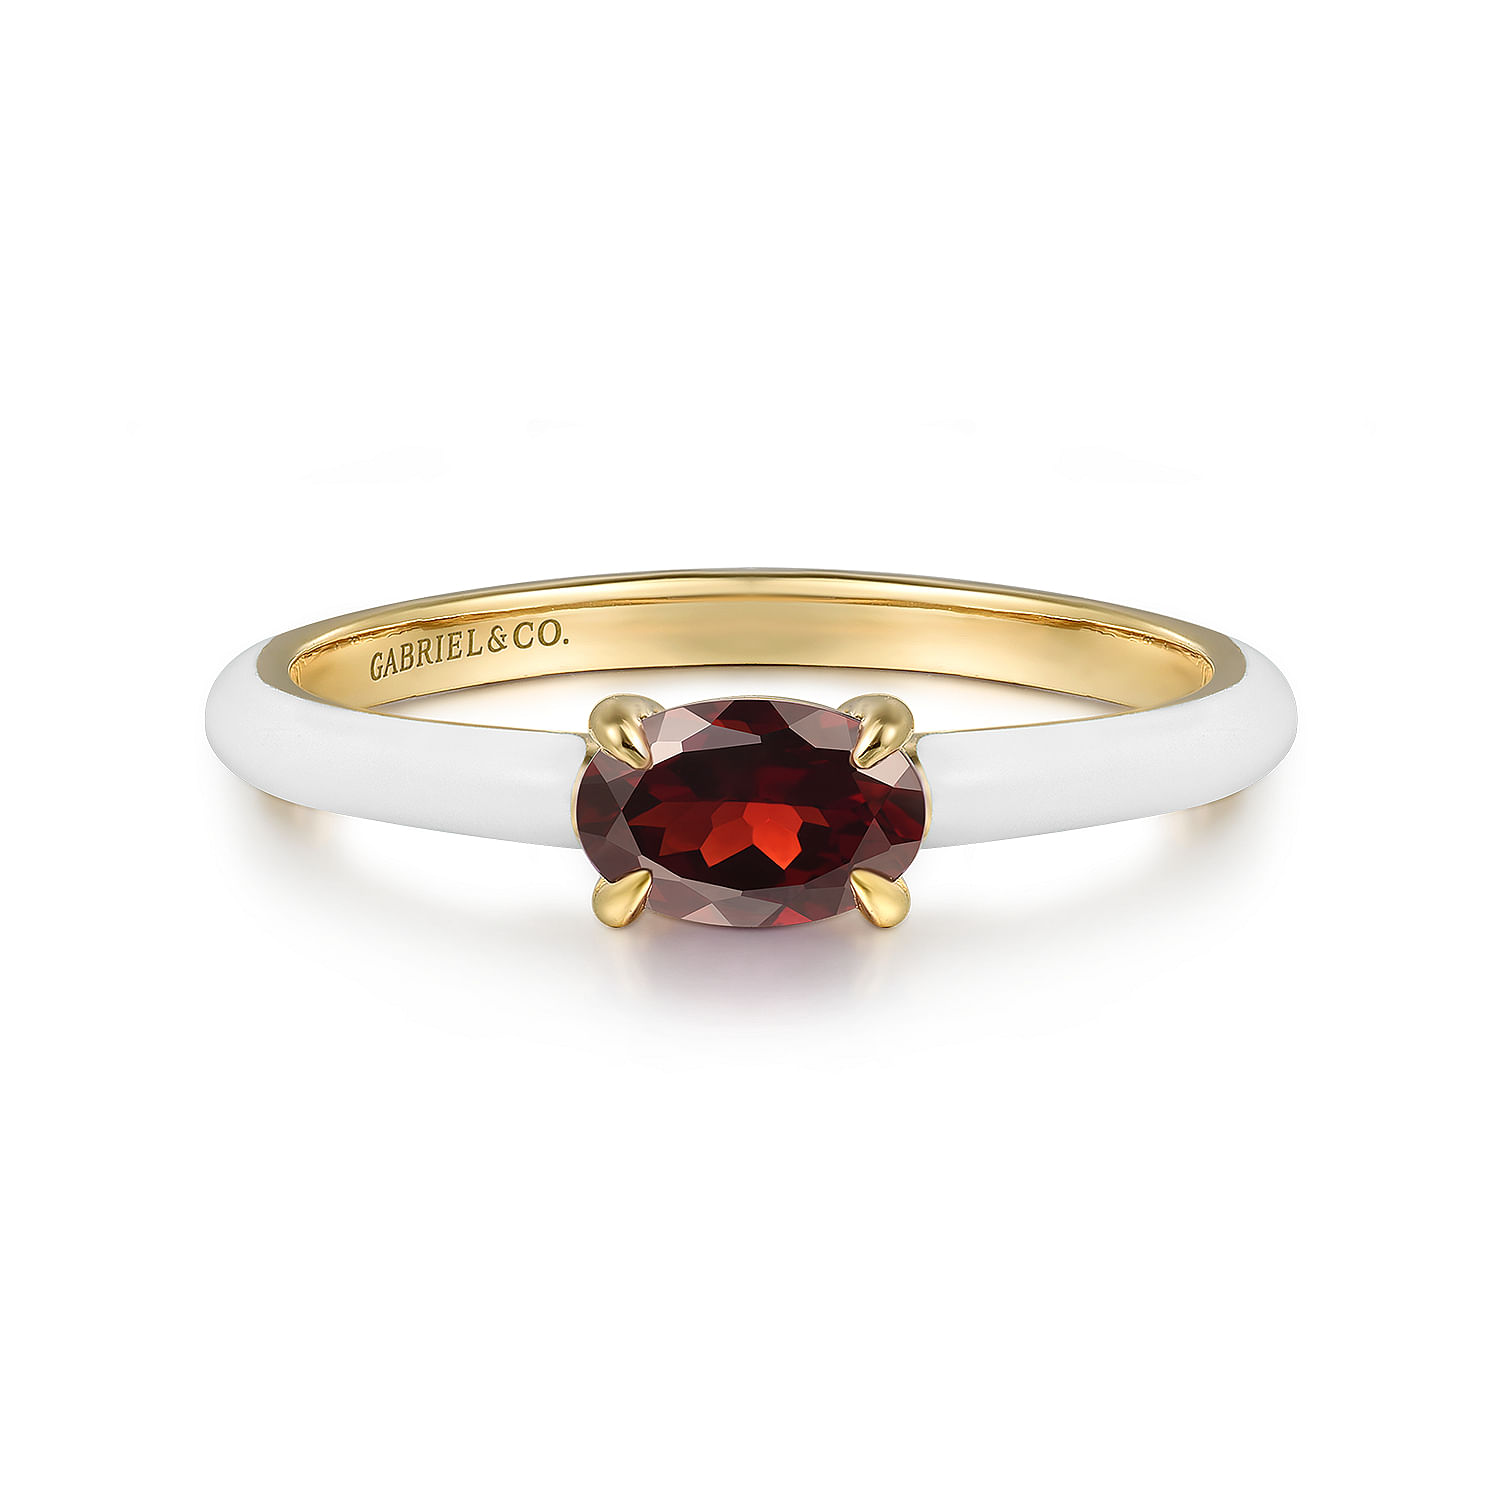 14K Yellow Gold Garnet Stackable Ring with White Enamel